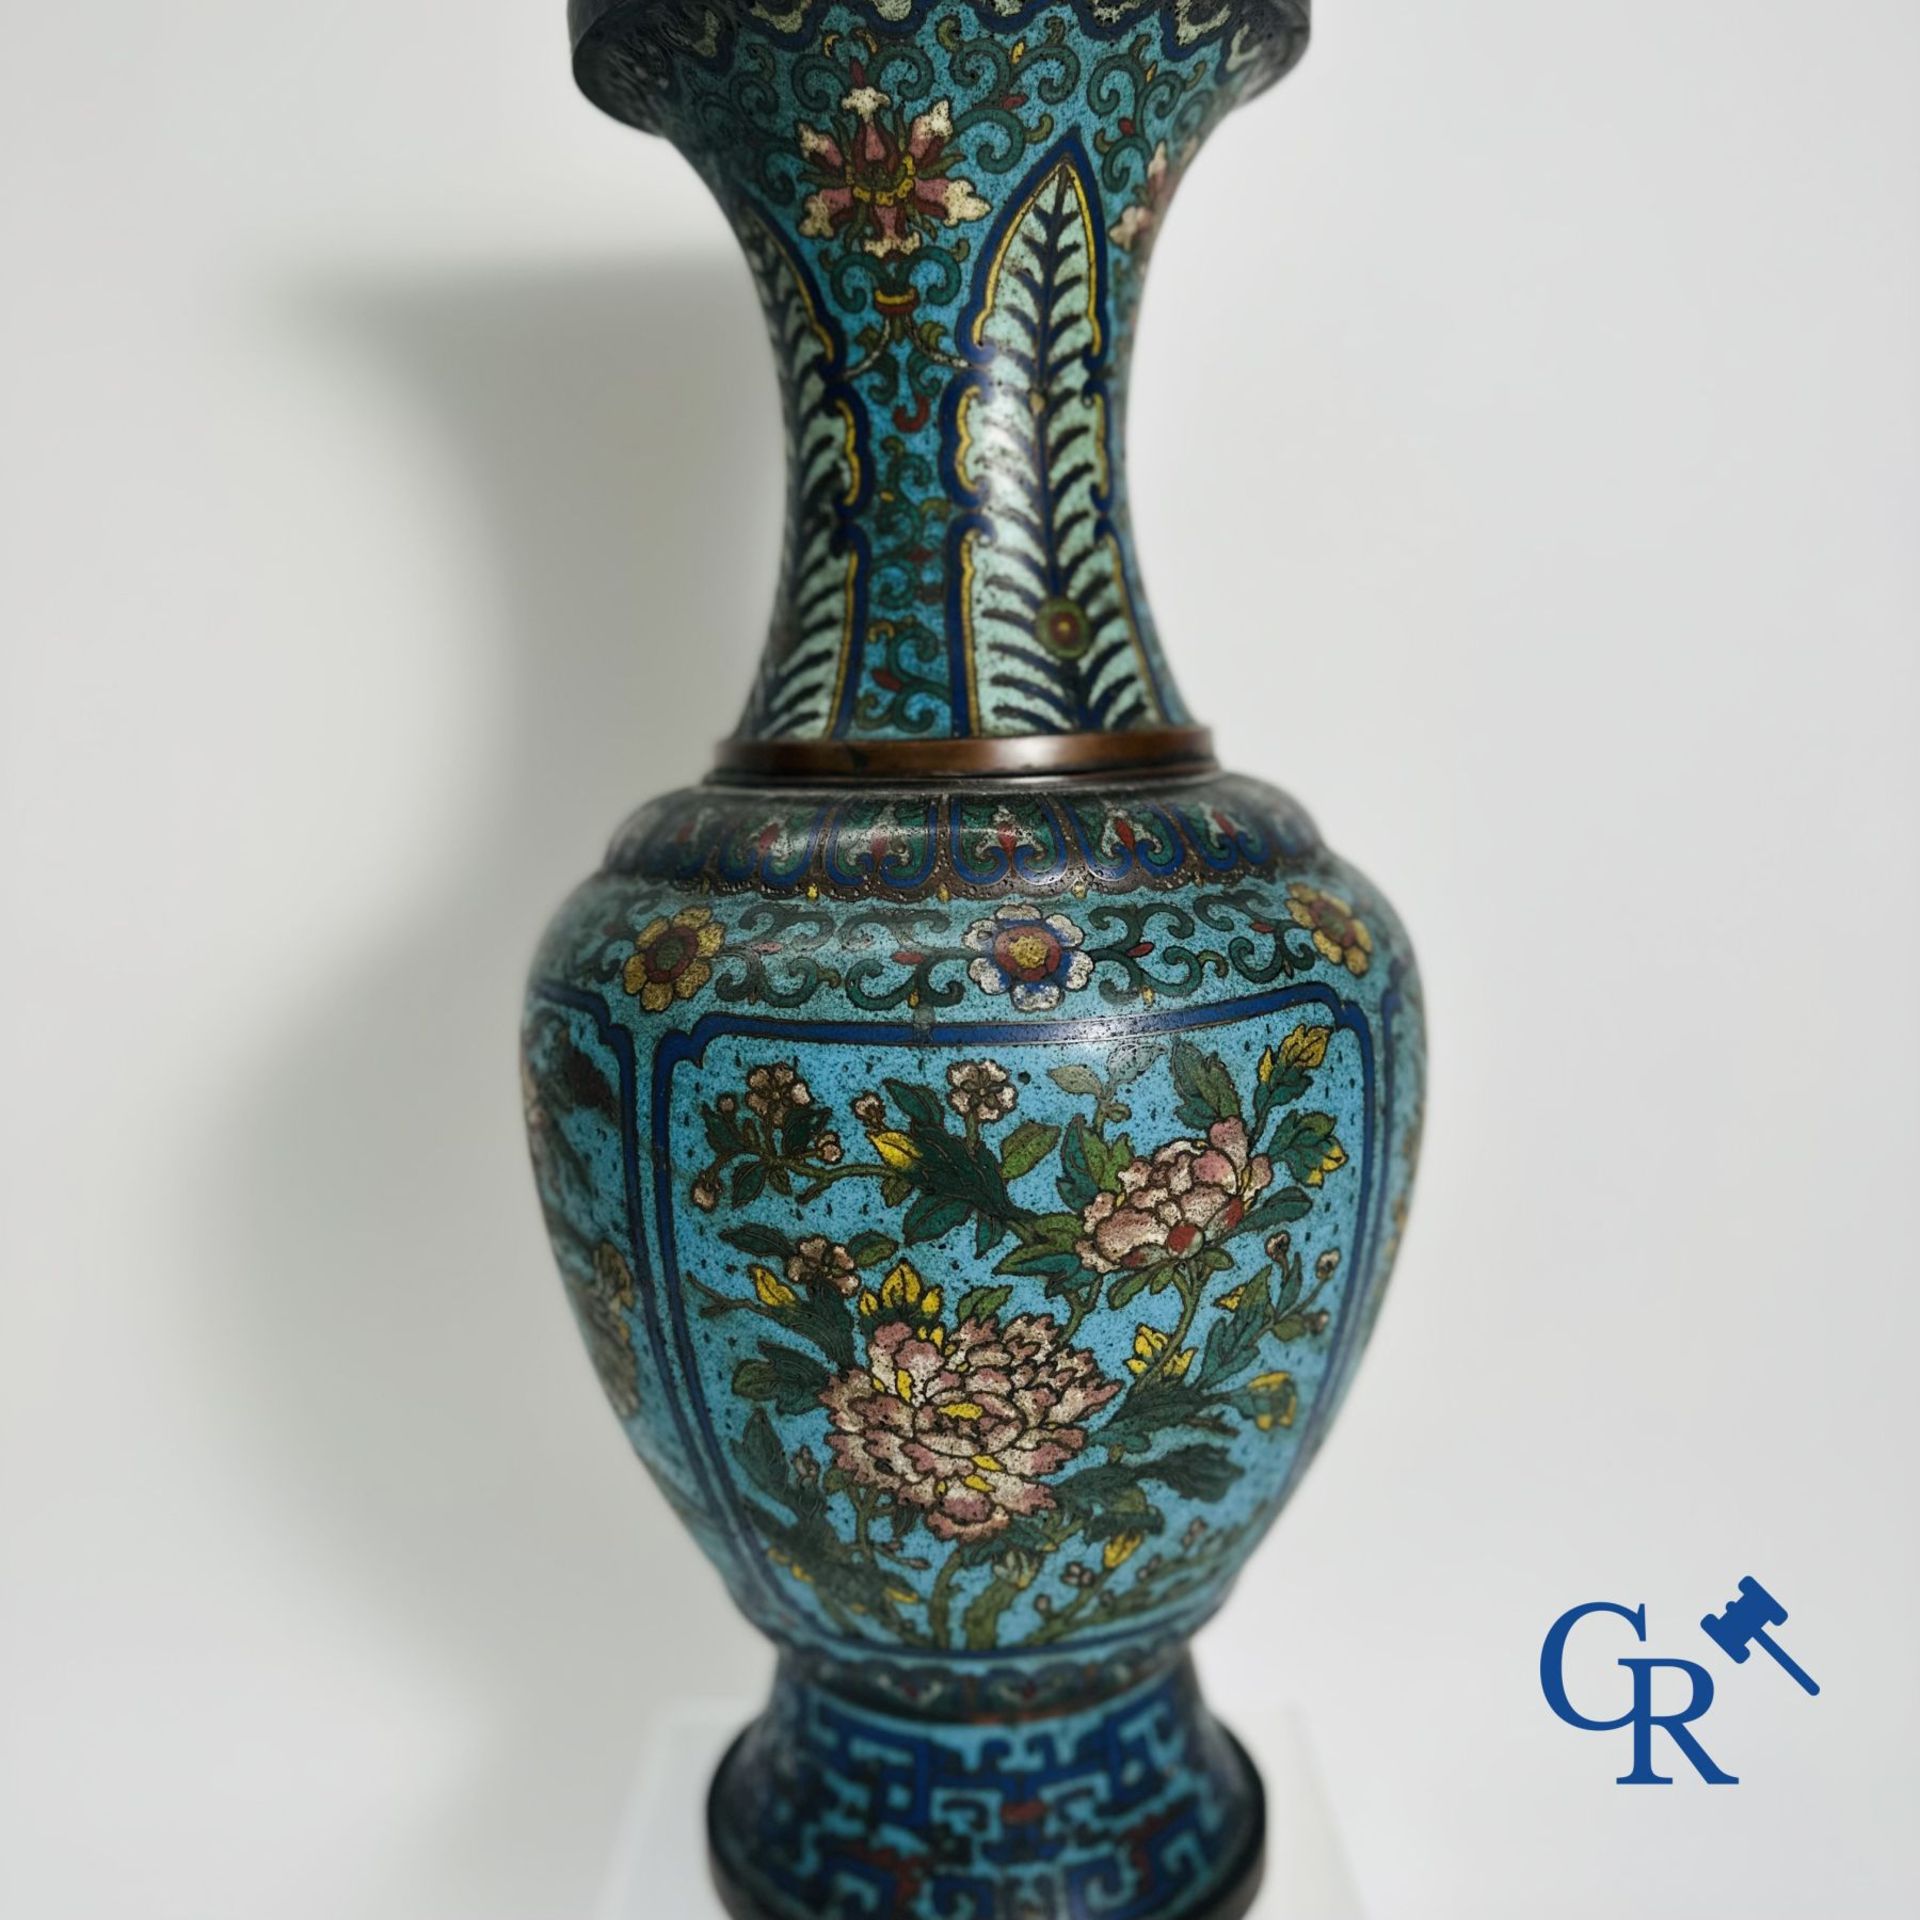 Chinese baluster-shaped vase in bronze and cloisonné. 19th century.